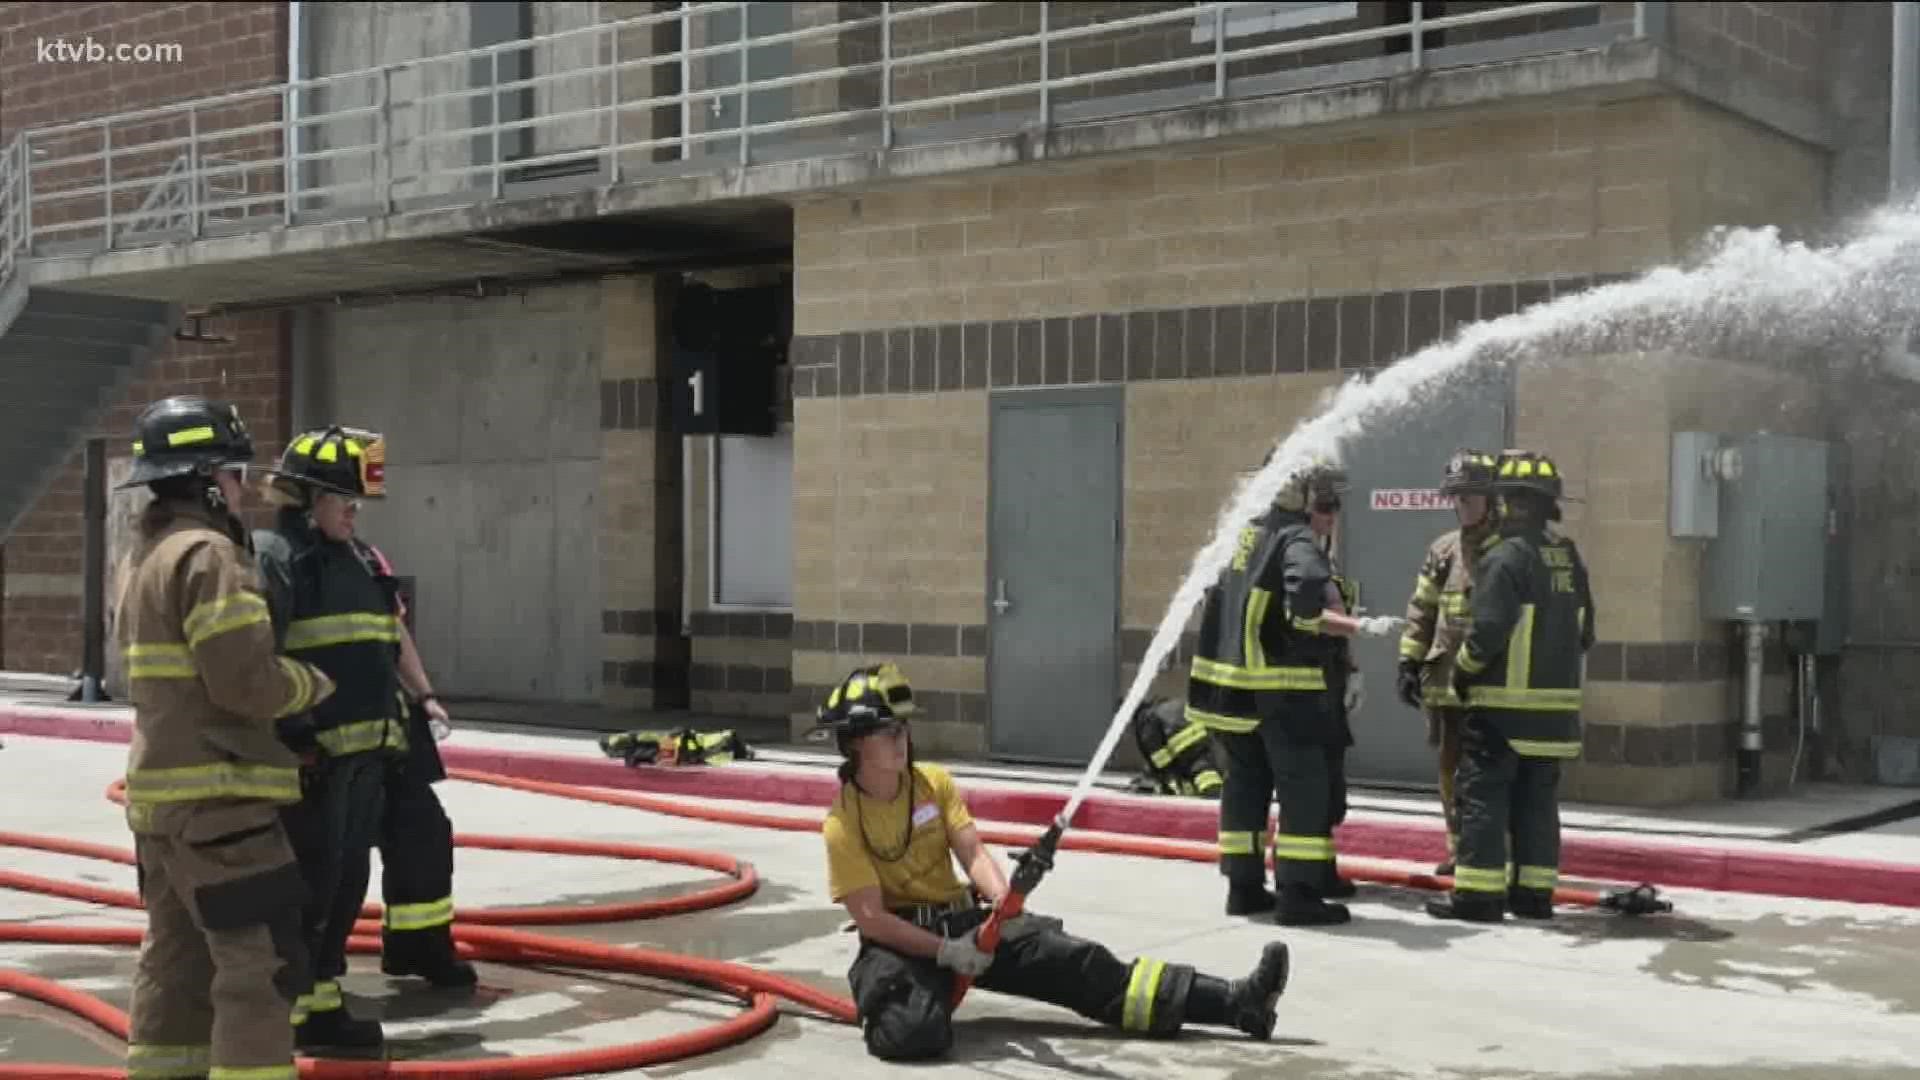 The Boise Fire Department and Ada County Paramedics hosted the all-women boot camp to provide a first-hand look into a fire service career.